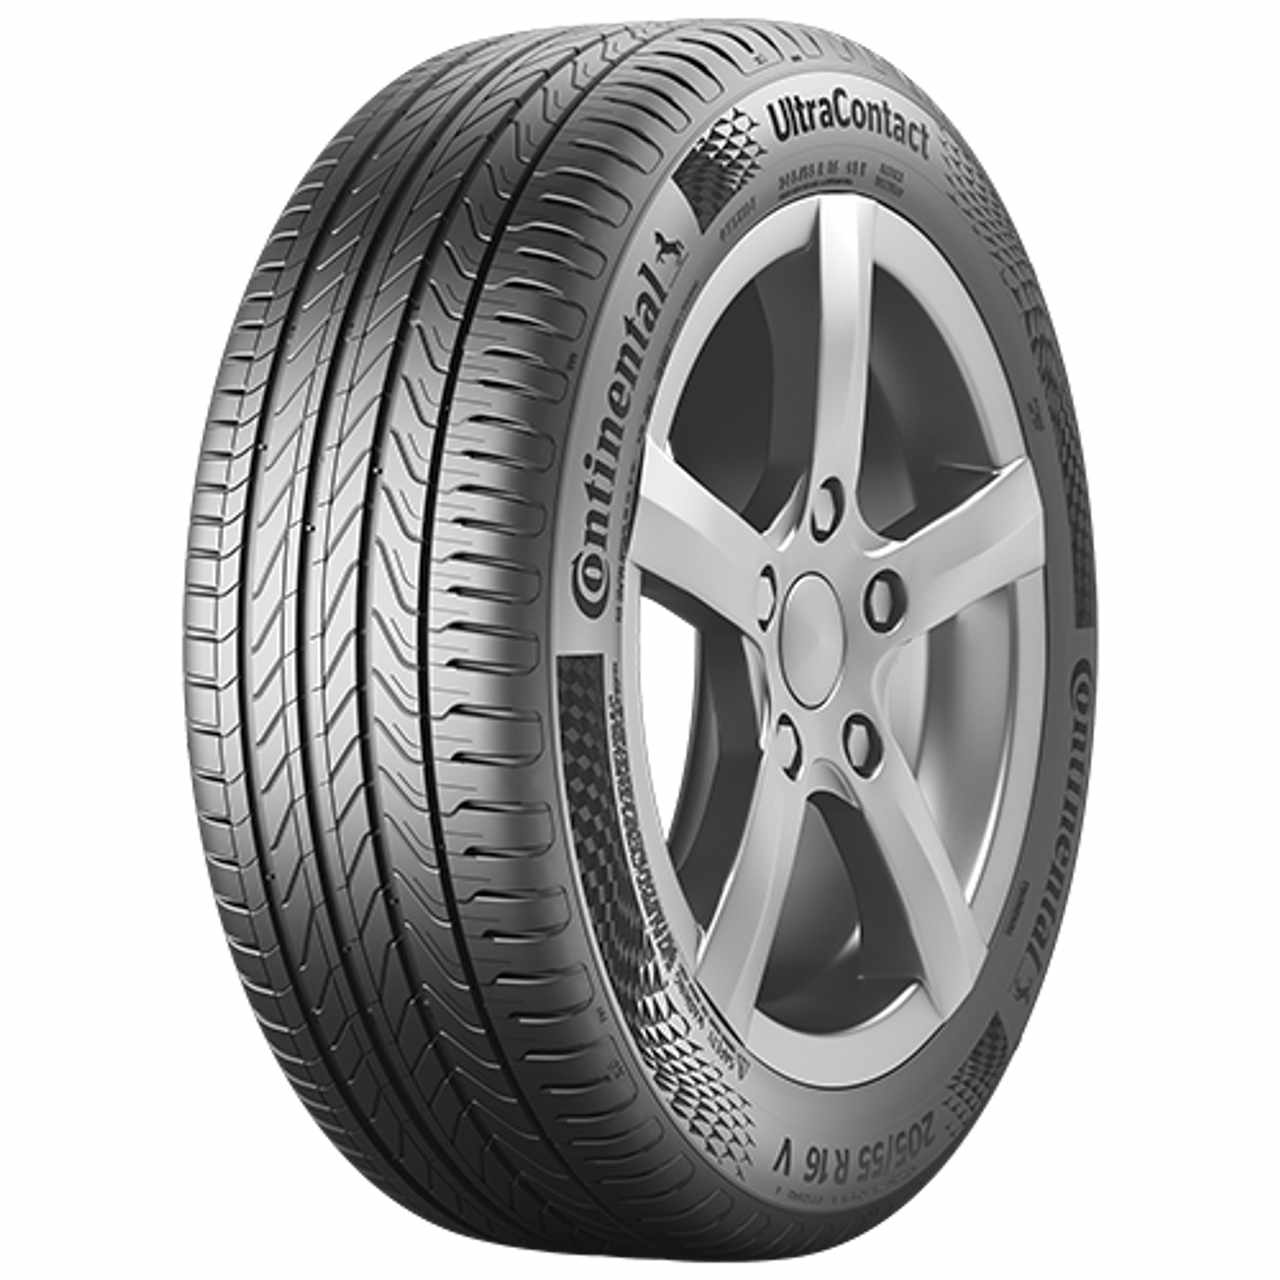 CONTINENTAL ULTRACONTACT (EVc) 205/50R17 89V FR BSW